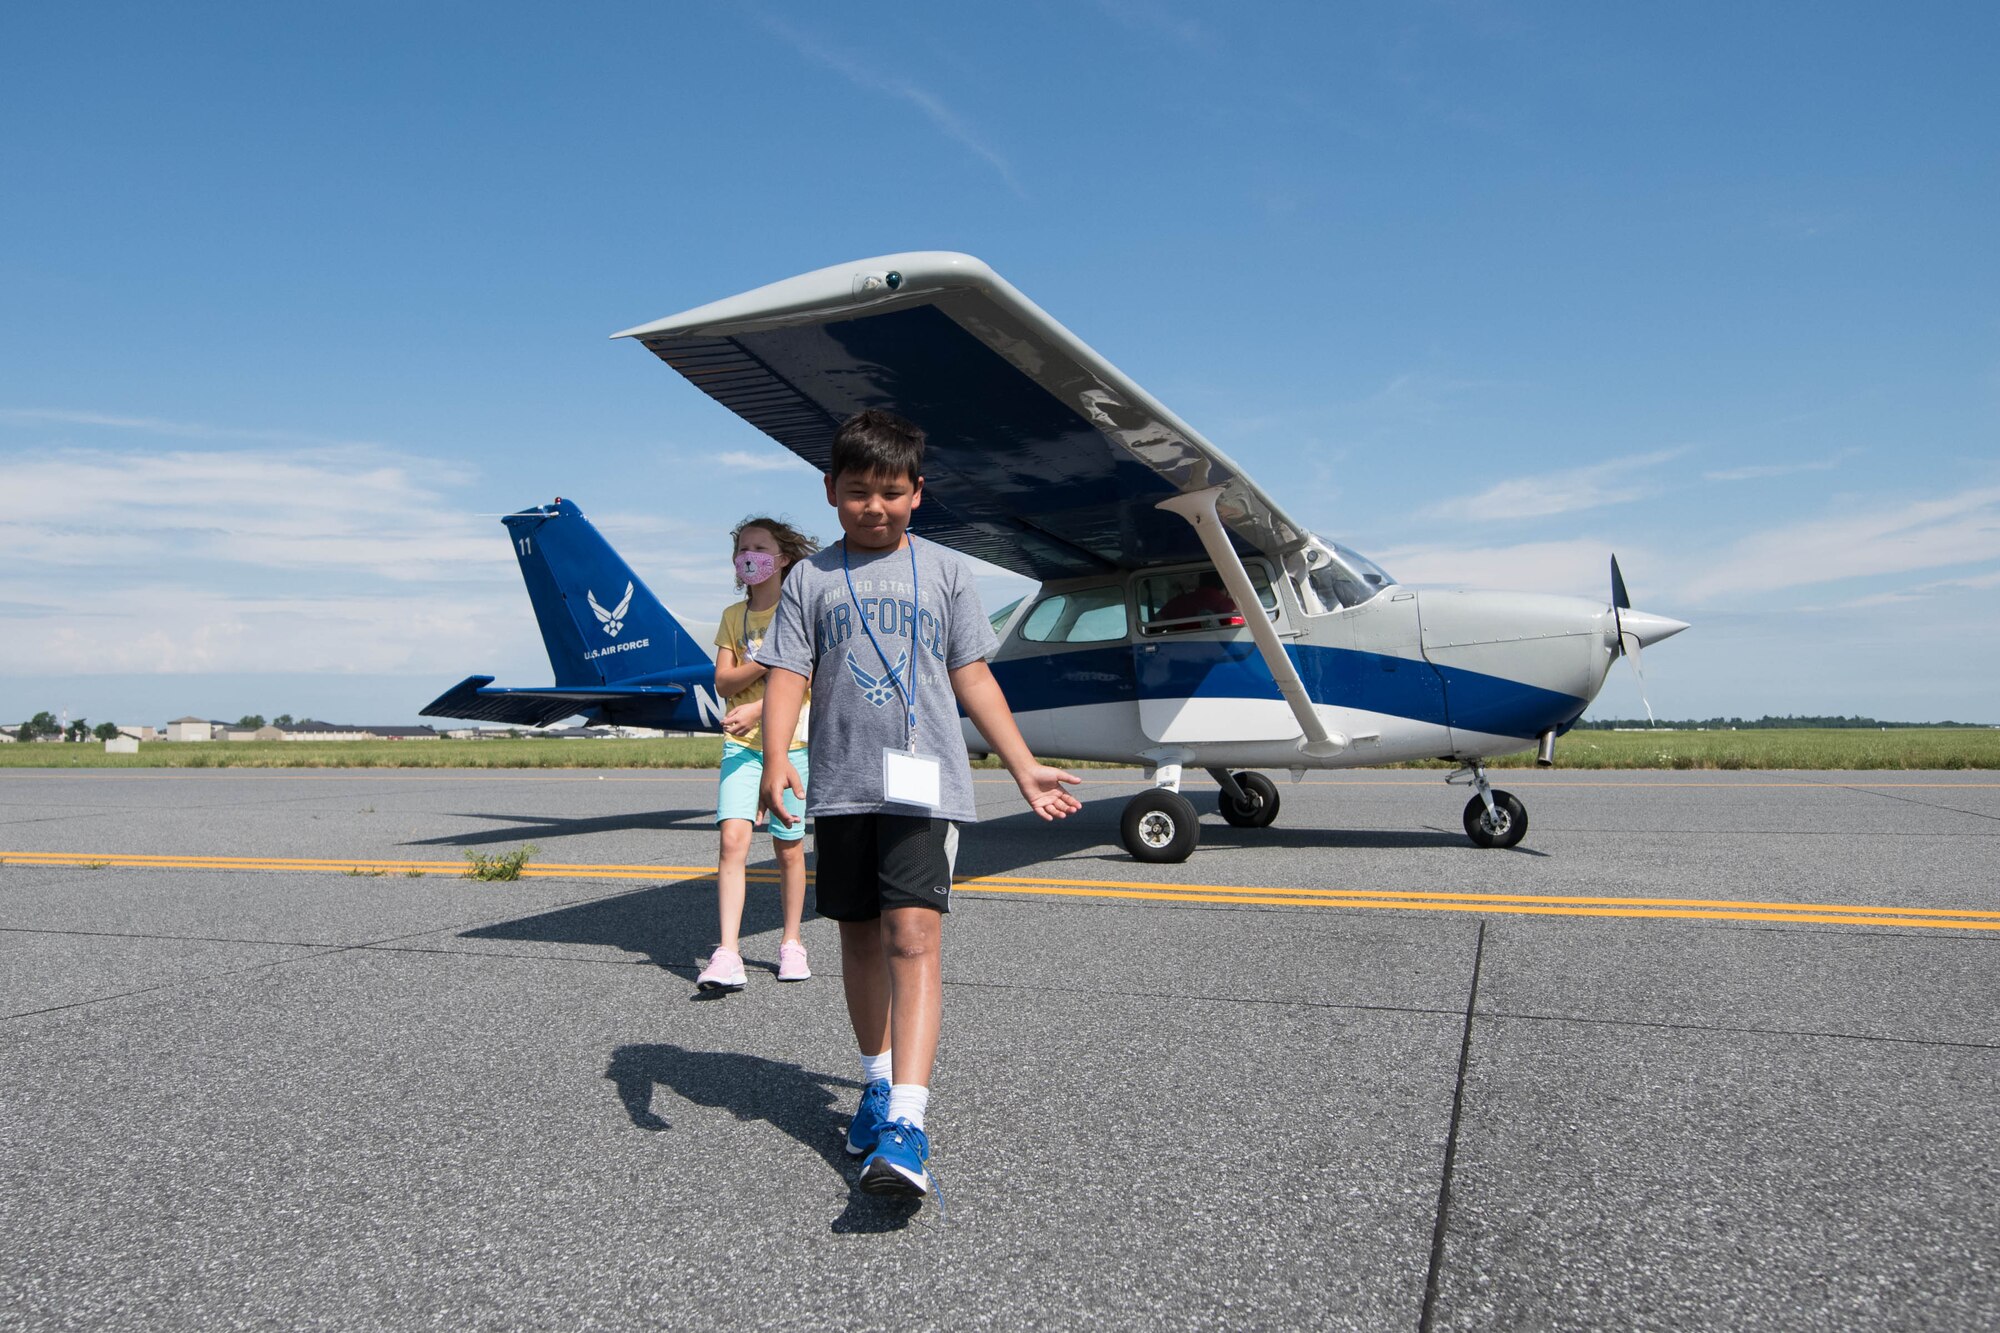 Ty Frazier and Noelle Robinson leave the runway after their flight in a Cessna 172 during a 2021 Aviation Summer Camp at the Air Mobility Command Museum in Dover, Delaware, July 1, 2021. During the camp, kids toured the AMC Museum and parts of Dover Air Force Base to learn about aviation. (U.S. Air Force photo by Mauricio Campino)